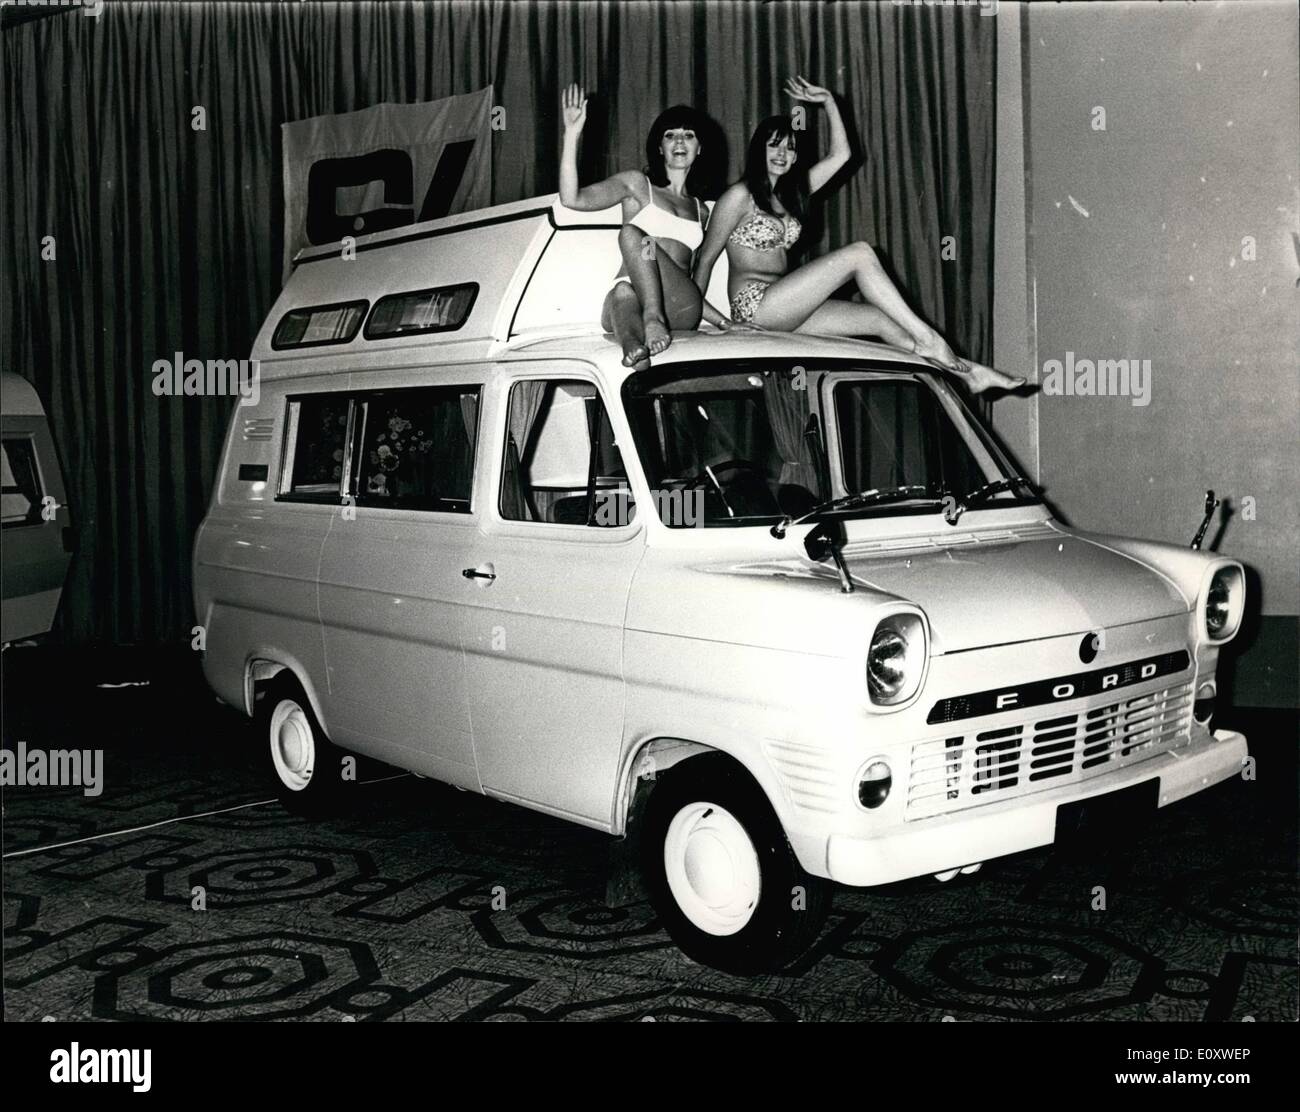 Oct. 09, 1967 - 9-10-67 New motorized and trailer ranges on show. Caravans International in association with the Ford Motor Company, today showed the new models in their 1968 motorized and trailer ranges, at the Europa Hotel in London. Keystone Photo Shows: Models Pauline Cunningham (left) and Gail Allen, with the new Sprite Wayfarer, the second of the Caravans International (Motorized) vans to be developed jointly in co-operation with the Ford Motor Company Stock Photo